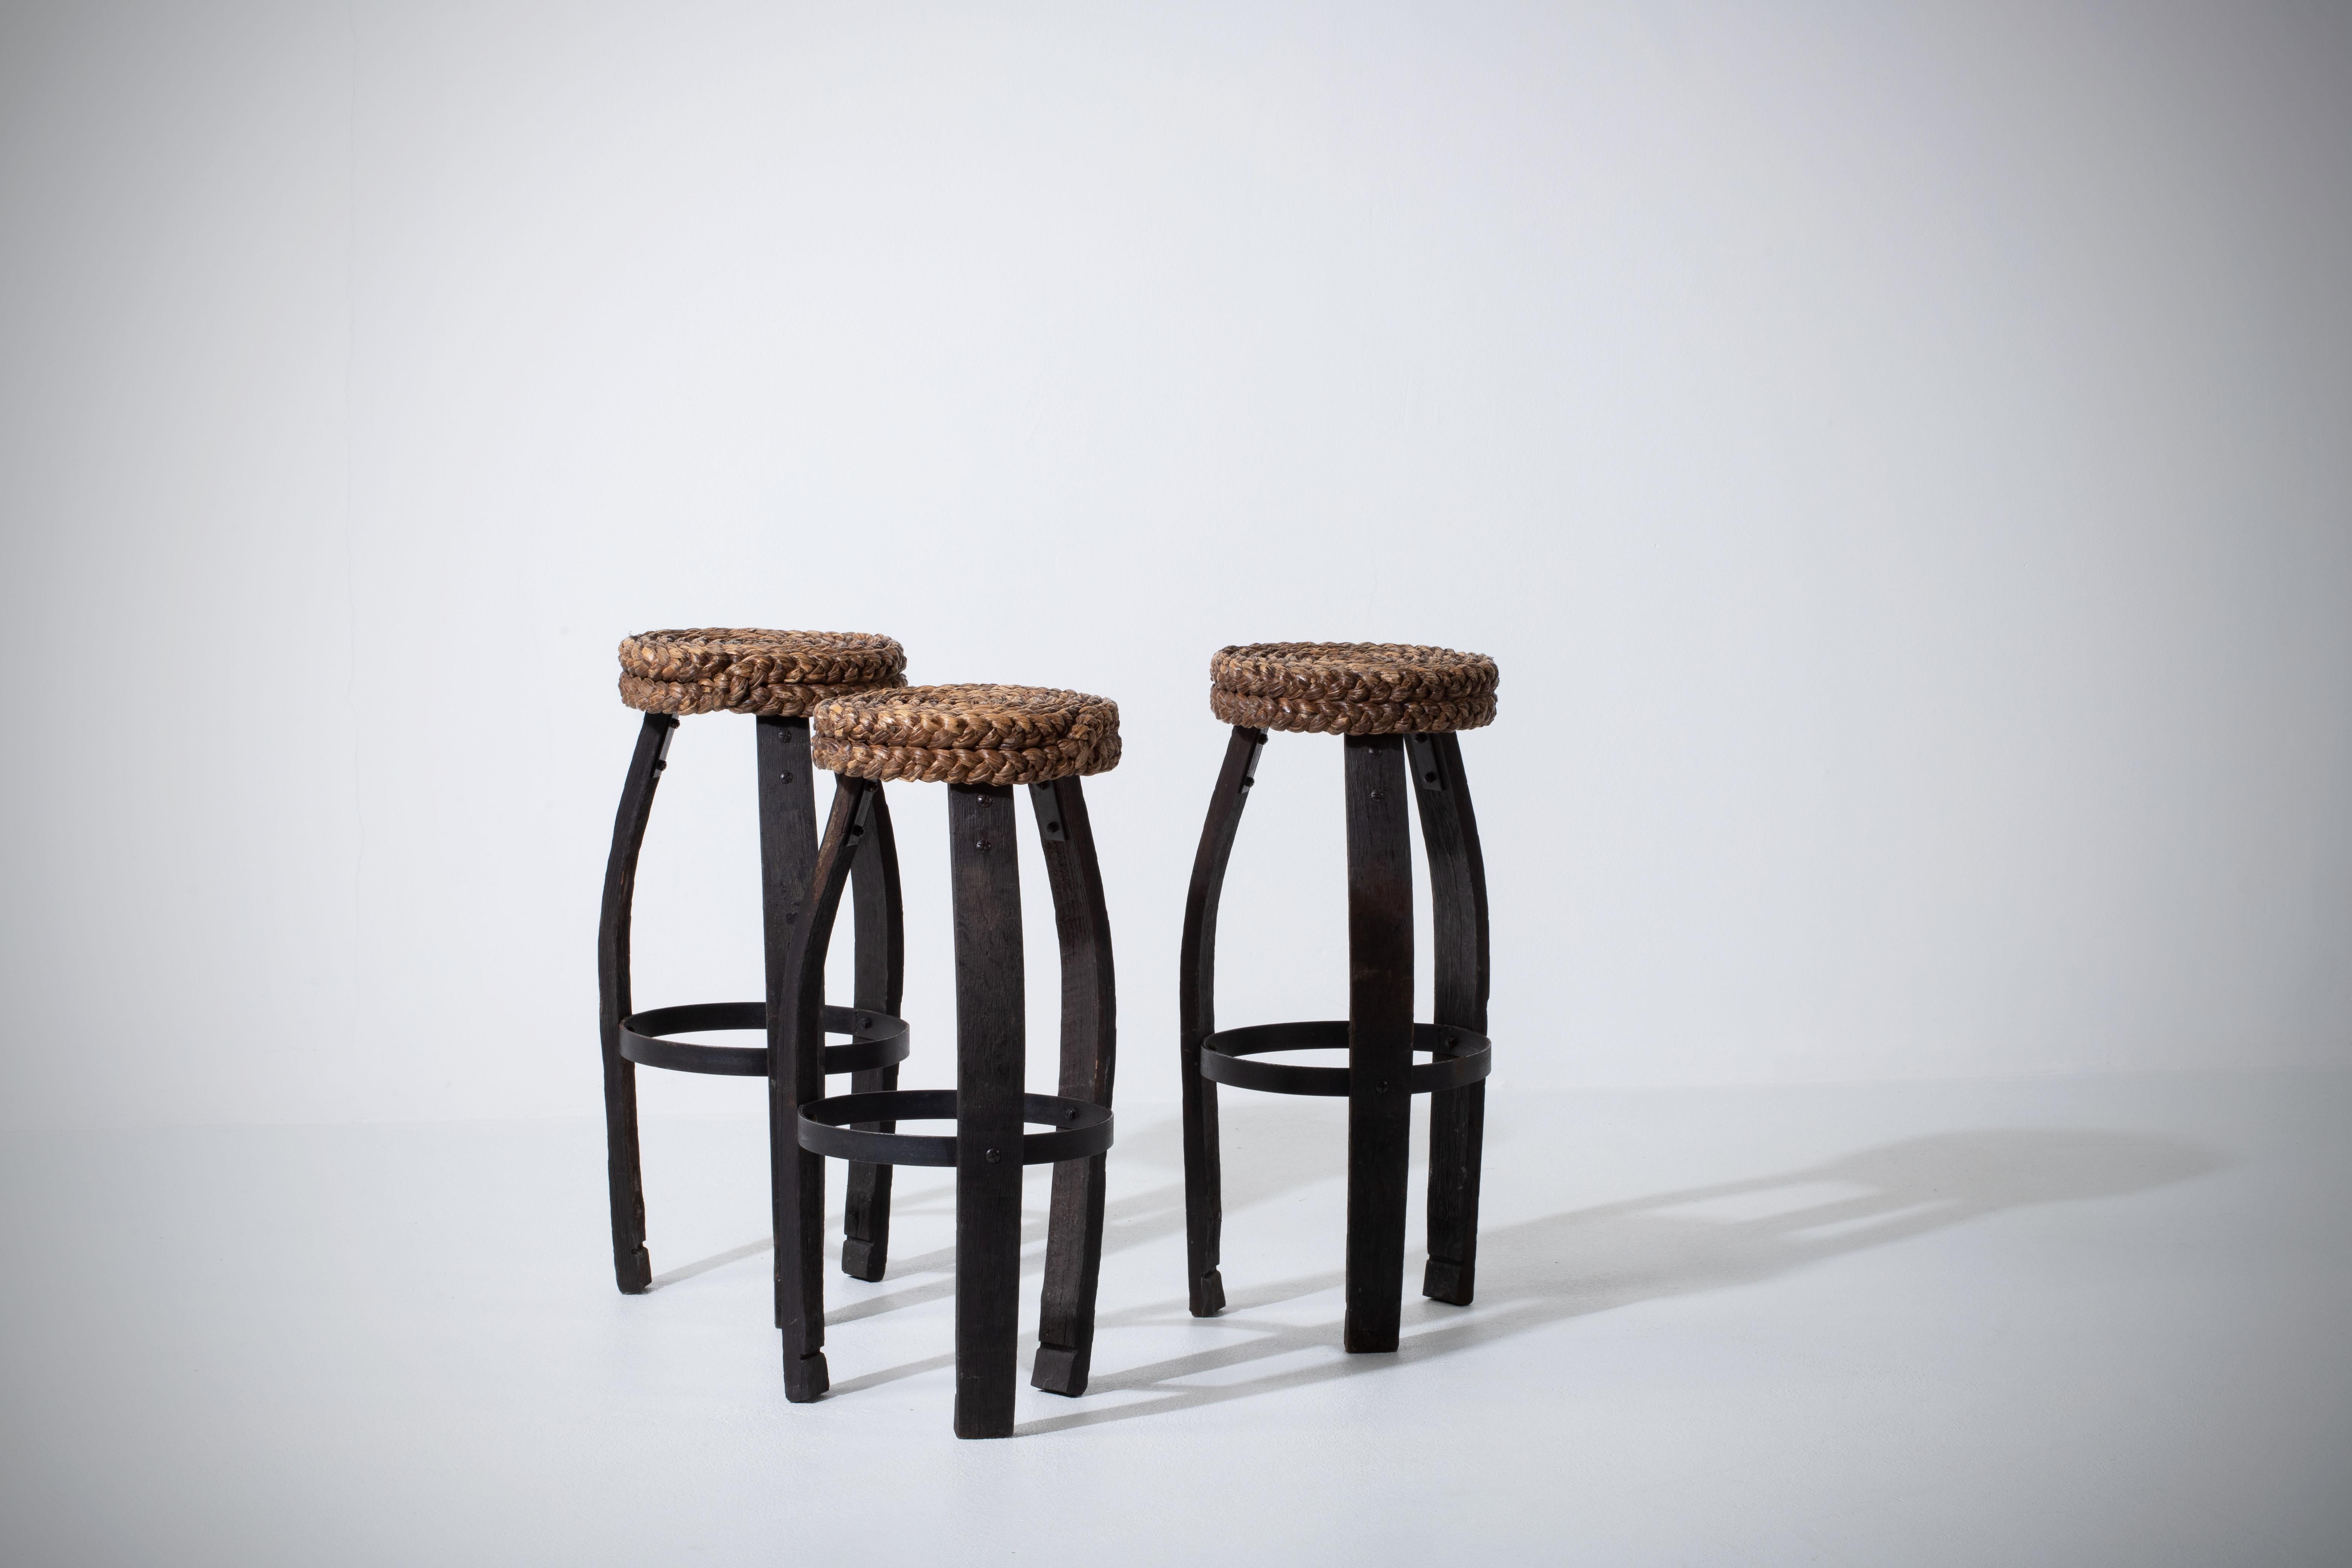 Raffia French Stool by Adrien Audoux & Frida Minet, 1950s For Sale